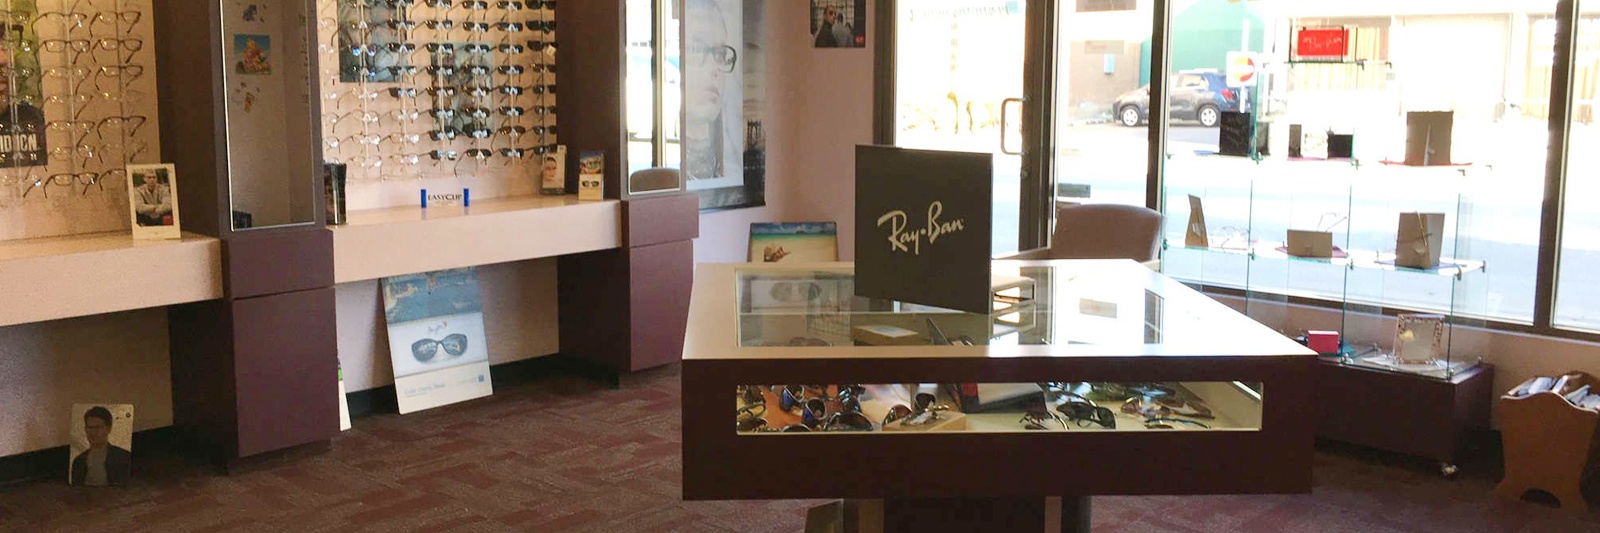 Contact Lenses, Sunglasses, Eyewear Accessories, Quality Eyewear Products - Optical Store in Penticton, BC